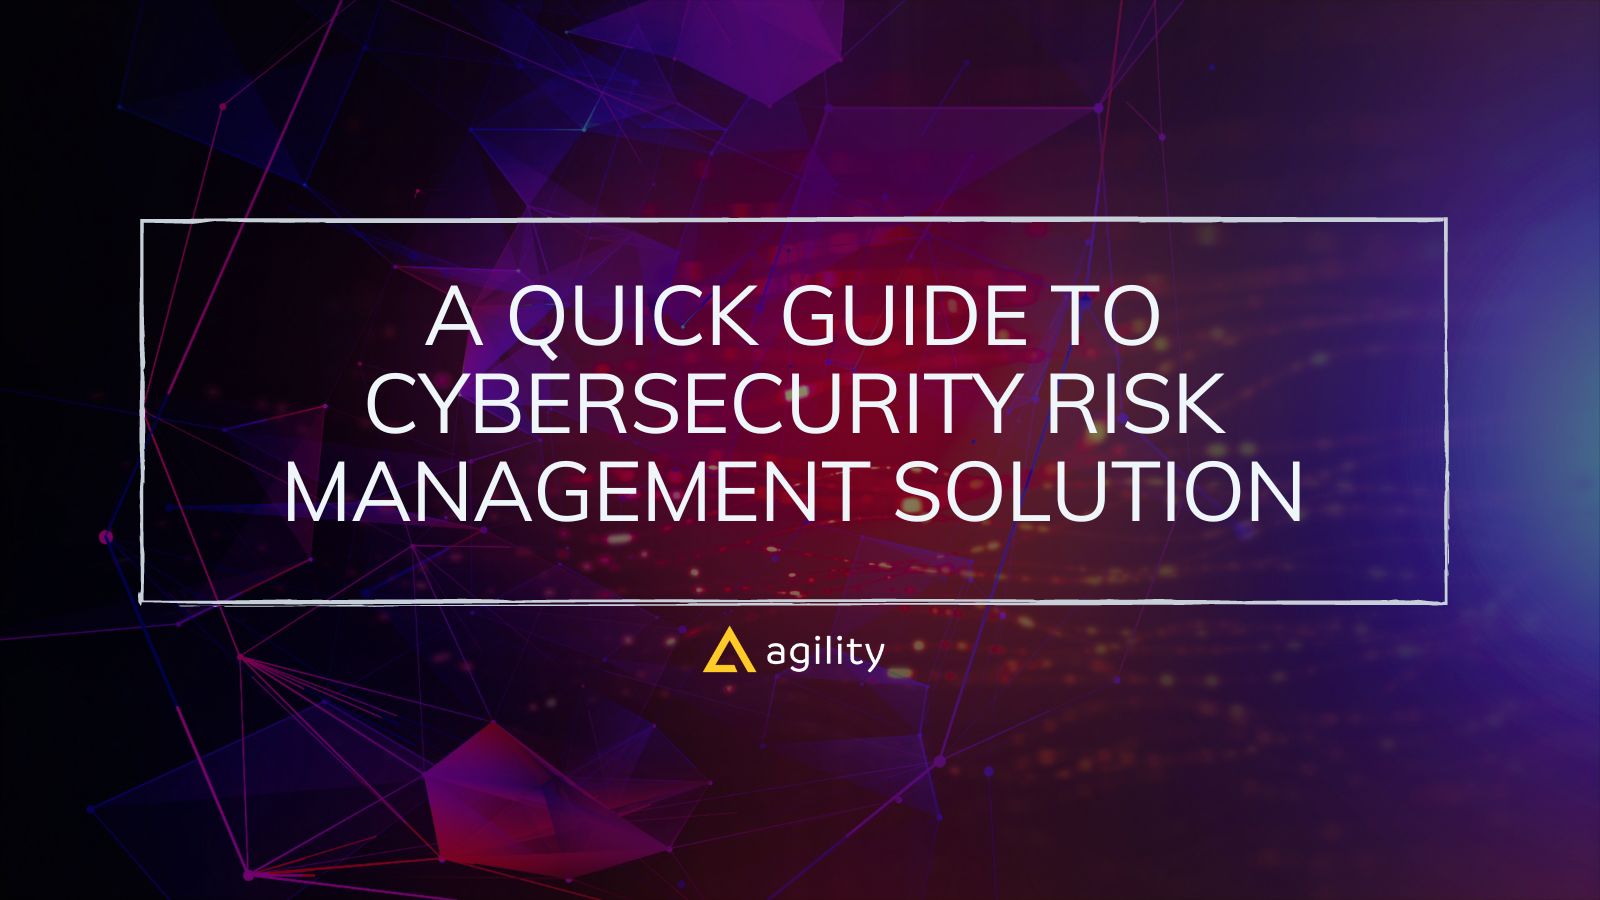 A Quick Guide to Cybersecurity Risk Management Solution